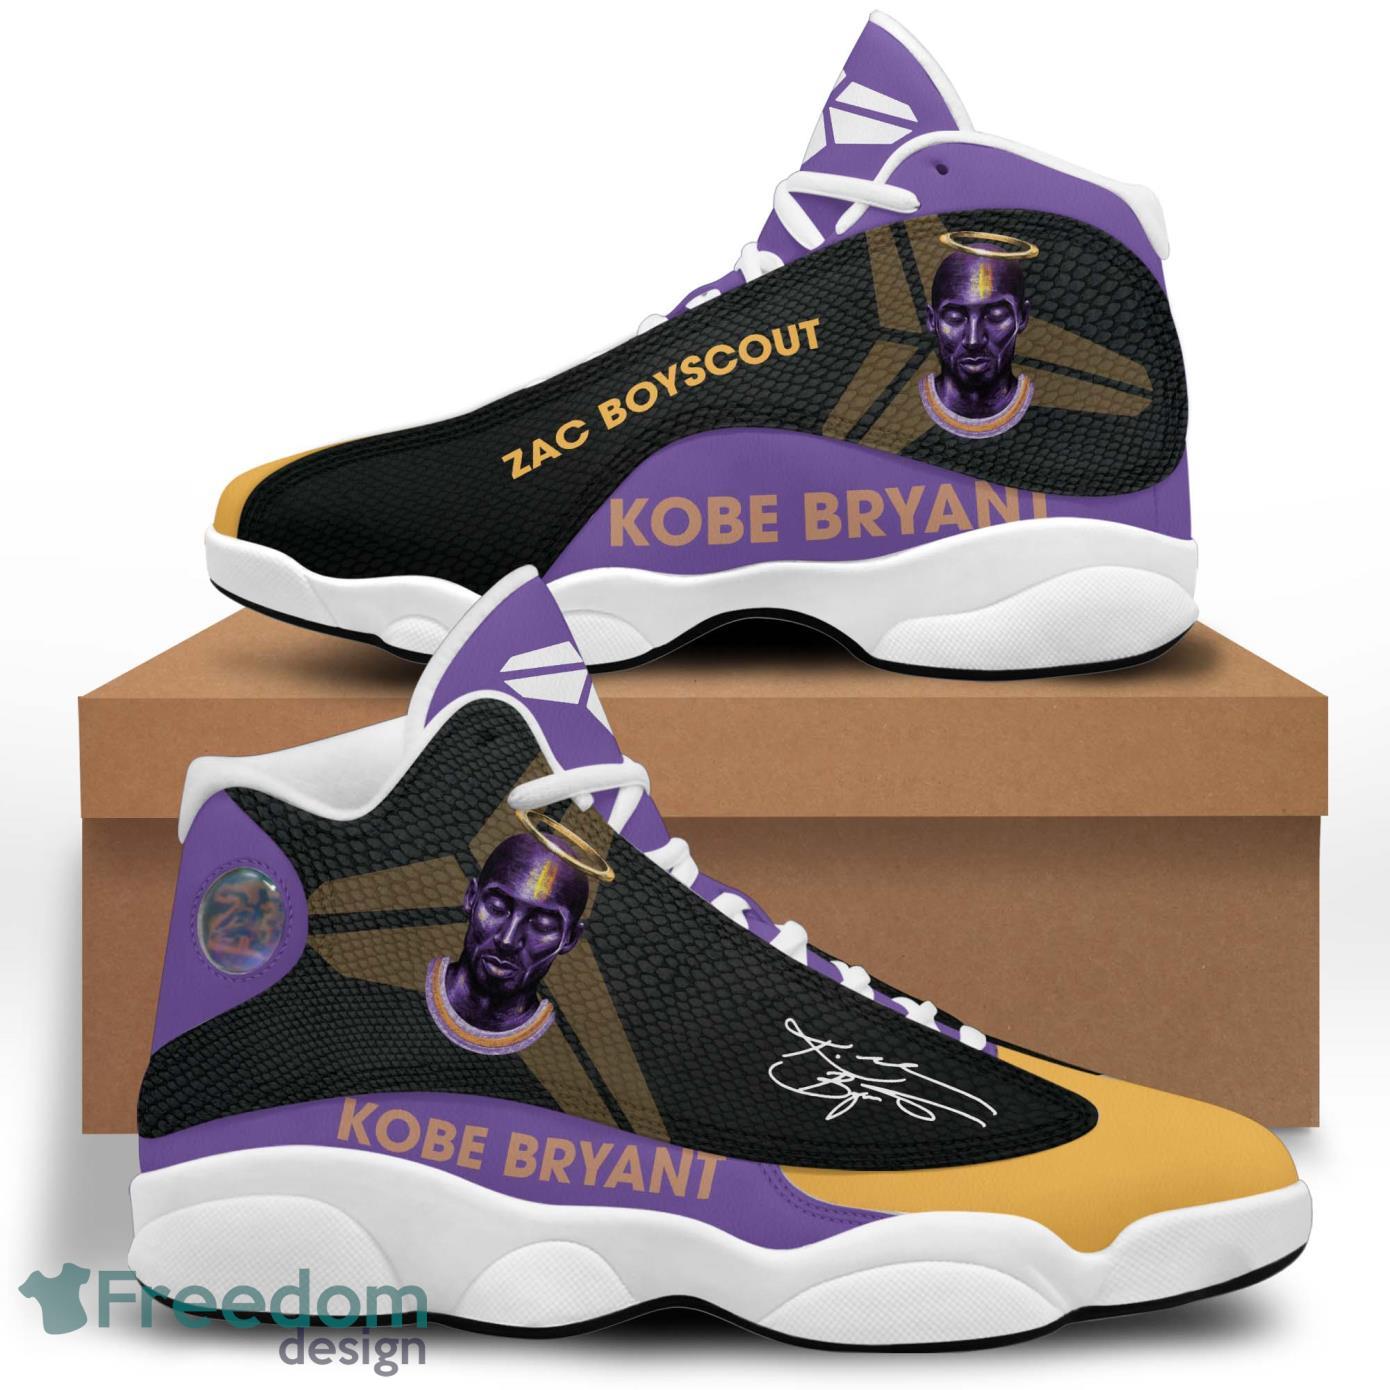 Kobe Bryant: A Tribute to A Basketball Legend - Personalized